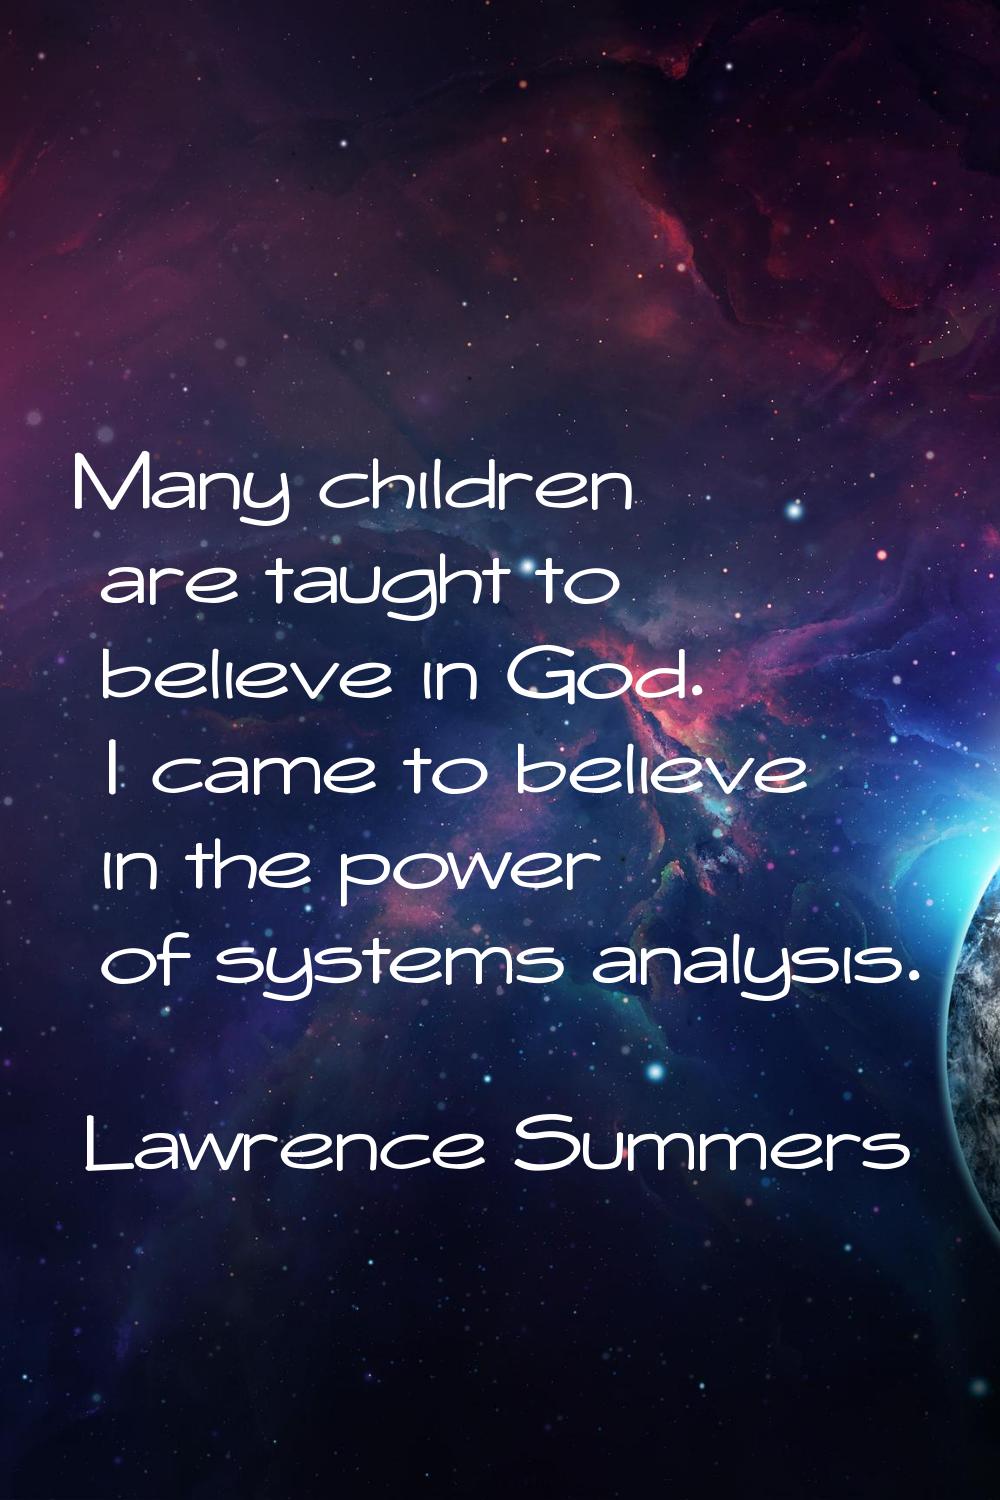 Many children are taught to believe in God. I came to believe in the power of systems analysis.